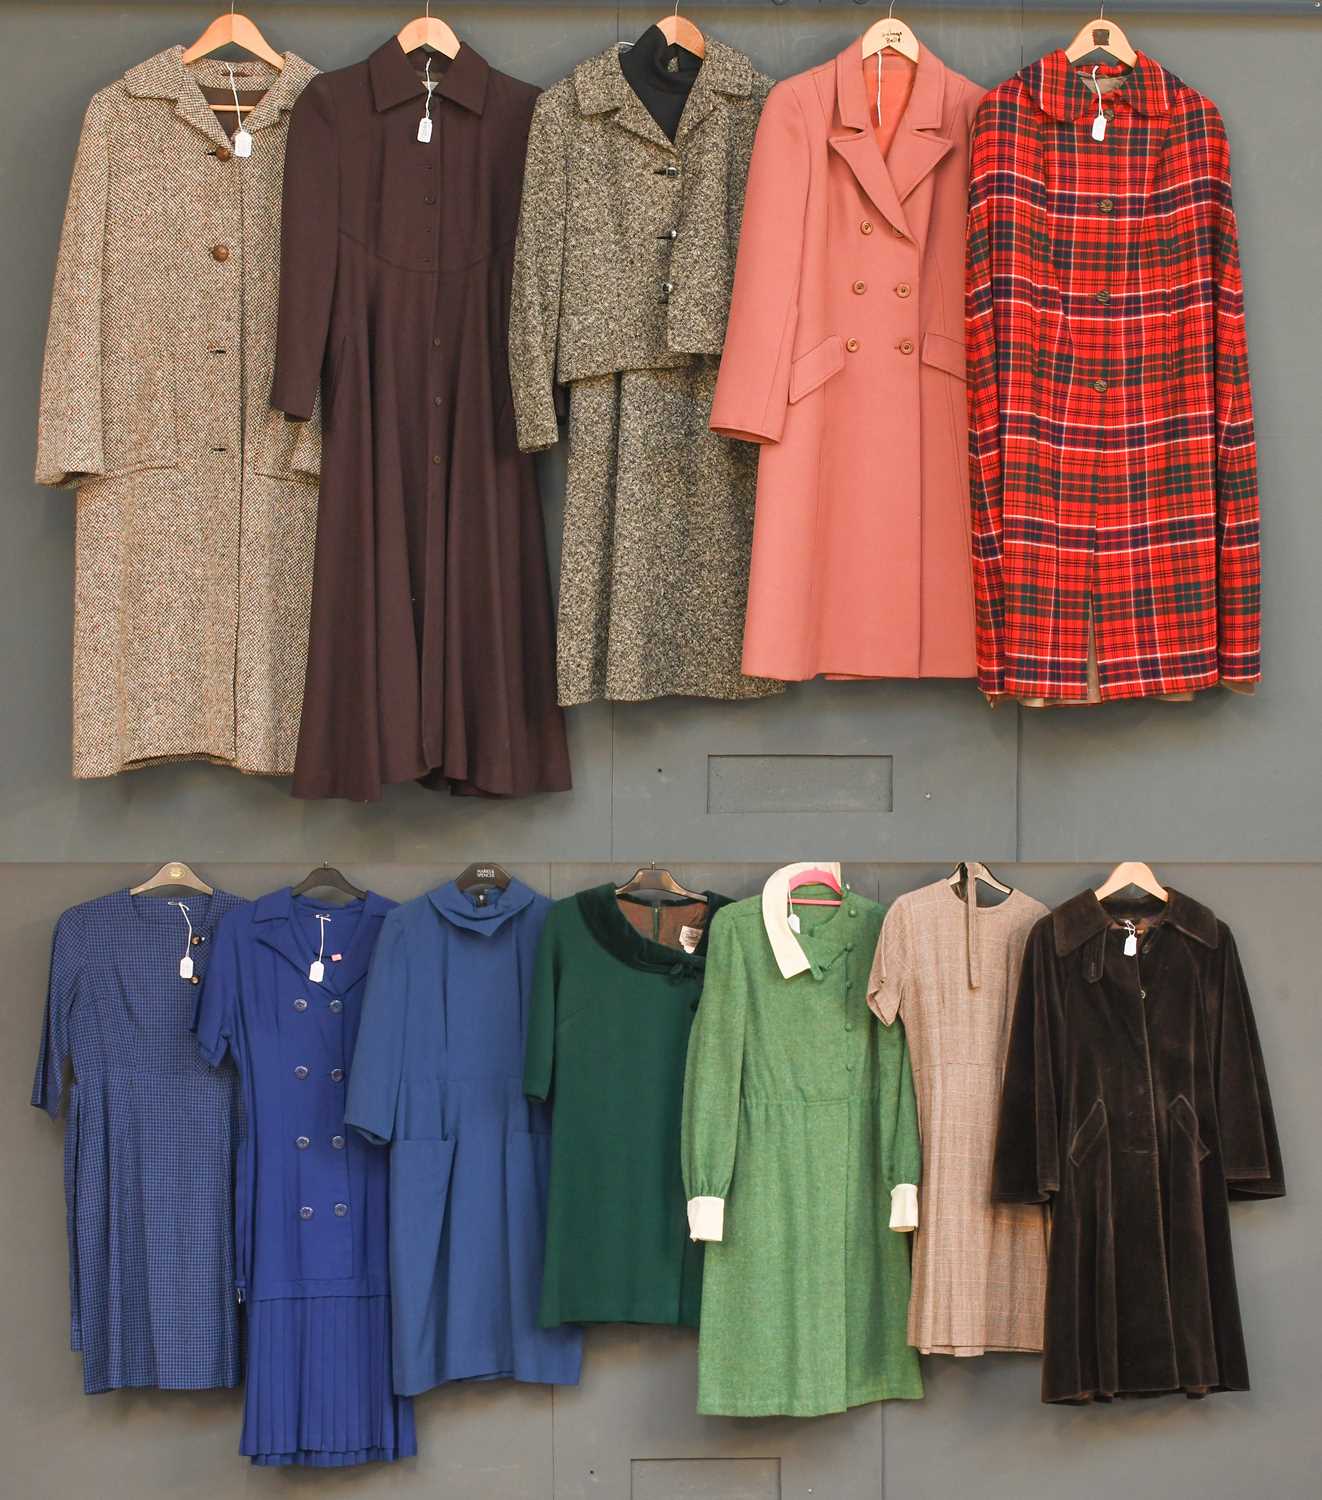 Circa 1950-60s Day Wear and Coats, comprising a wool checked short sleeve shift dress, scooped